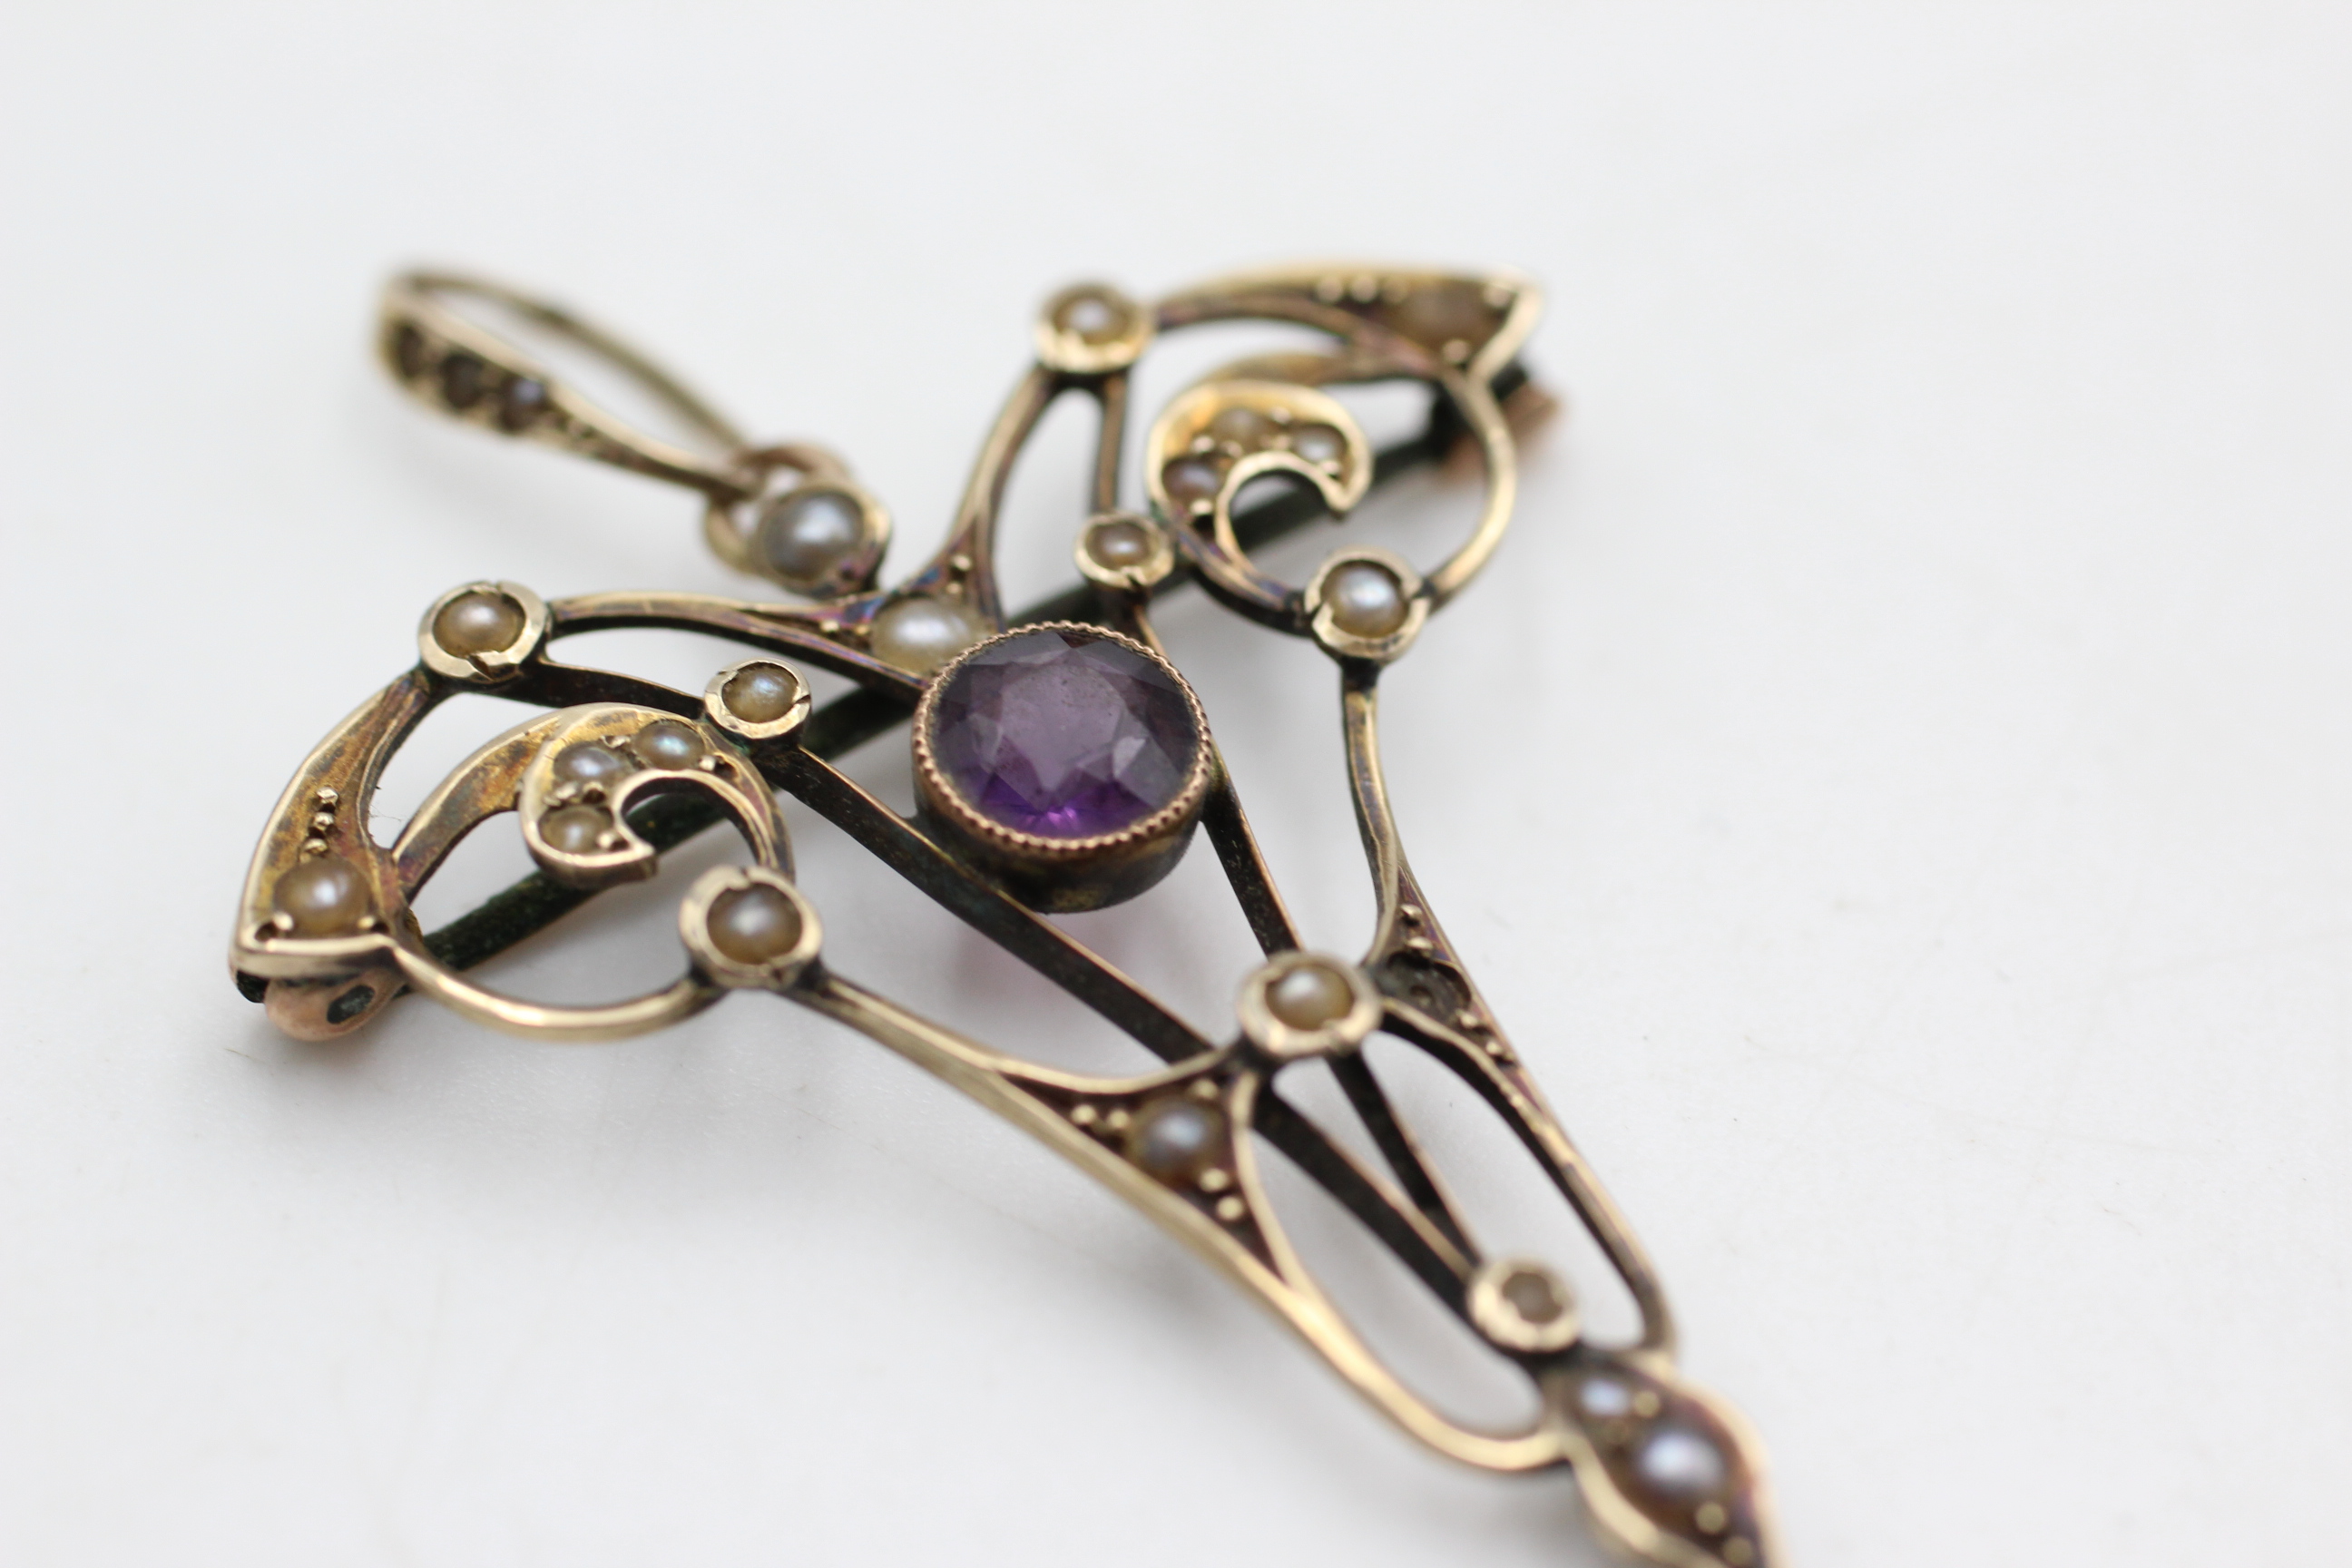 9ct gold antique amethyst & seed pearl lavalier pendant - as seen (3.4g) - Image 4 of 5